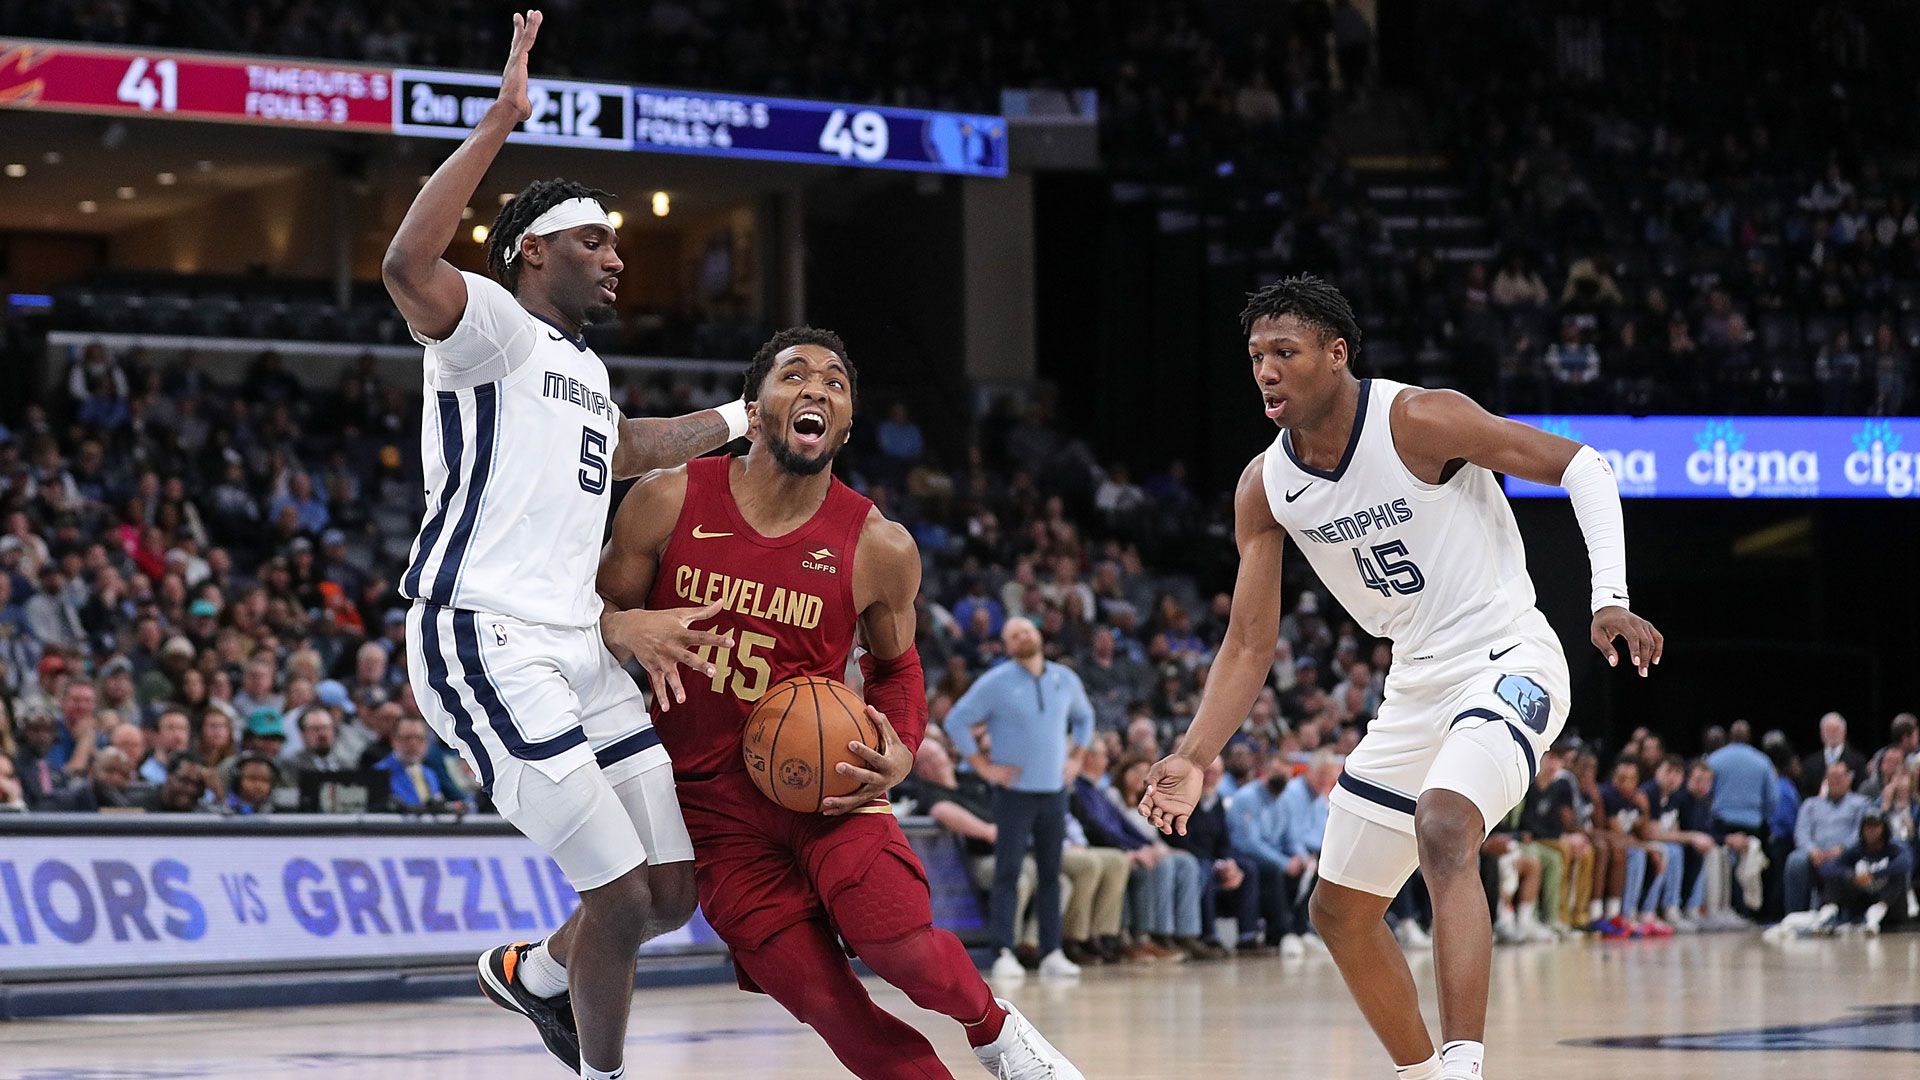 MEMPHIS, TENNESSEE - FEBRUARY 01: Vince Williams Jr. #5 of the Memphis Grizzlies and GG Jackson #45 of the Memphis Grizzlies defend against Donovan Mitchell #45 of the Cleveland Cavaliers  during the game at FedExForum on February 01, 2024 in Memphis, Tennessee.